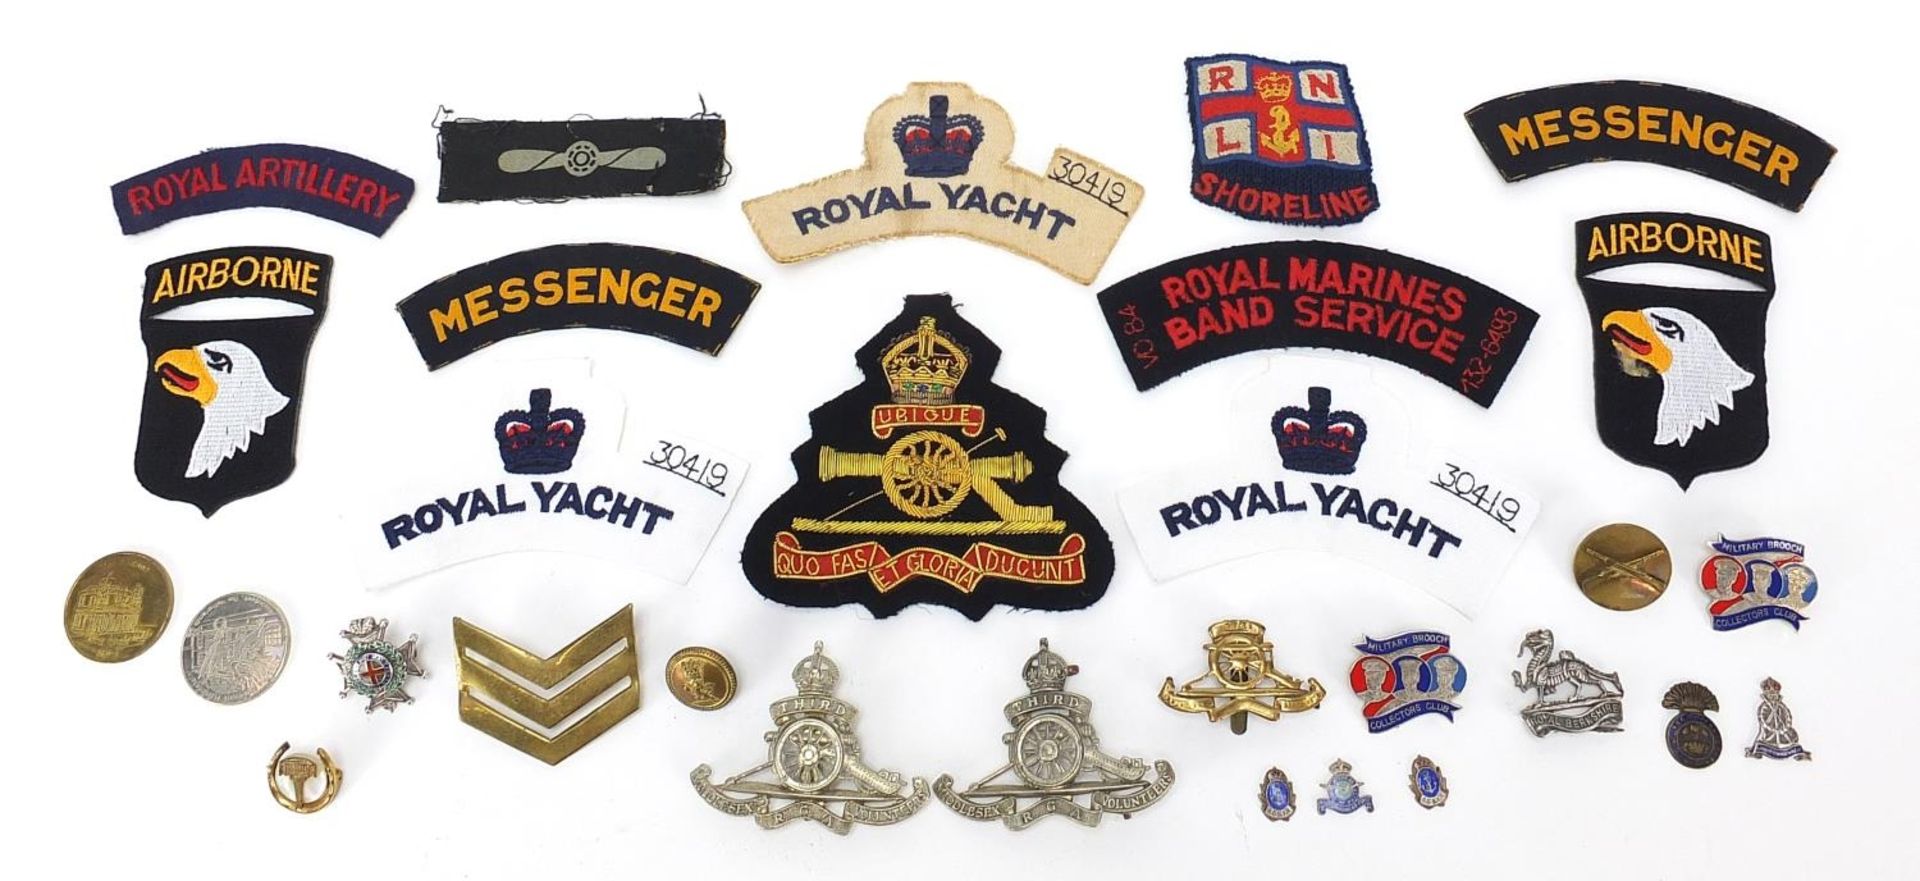 British military interest cloth patches and badges, some silver and enamel including Royal Artillery